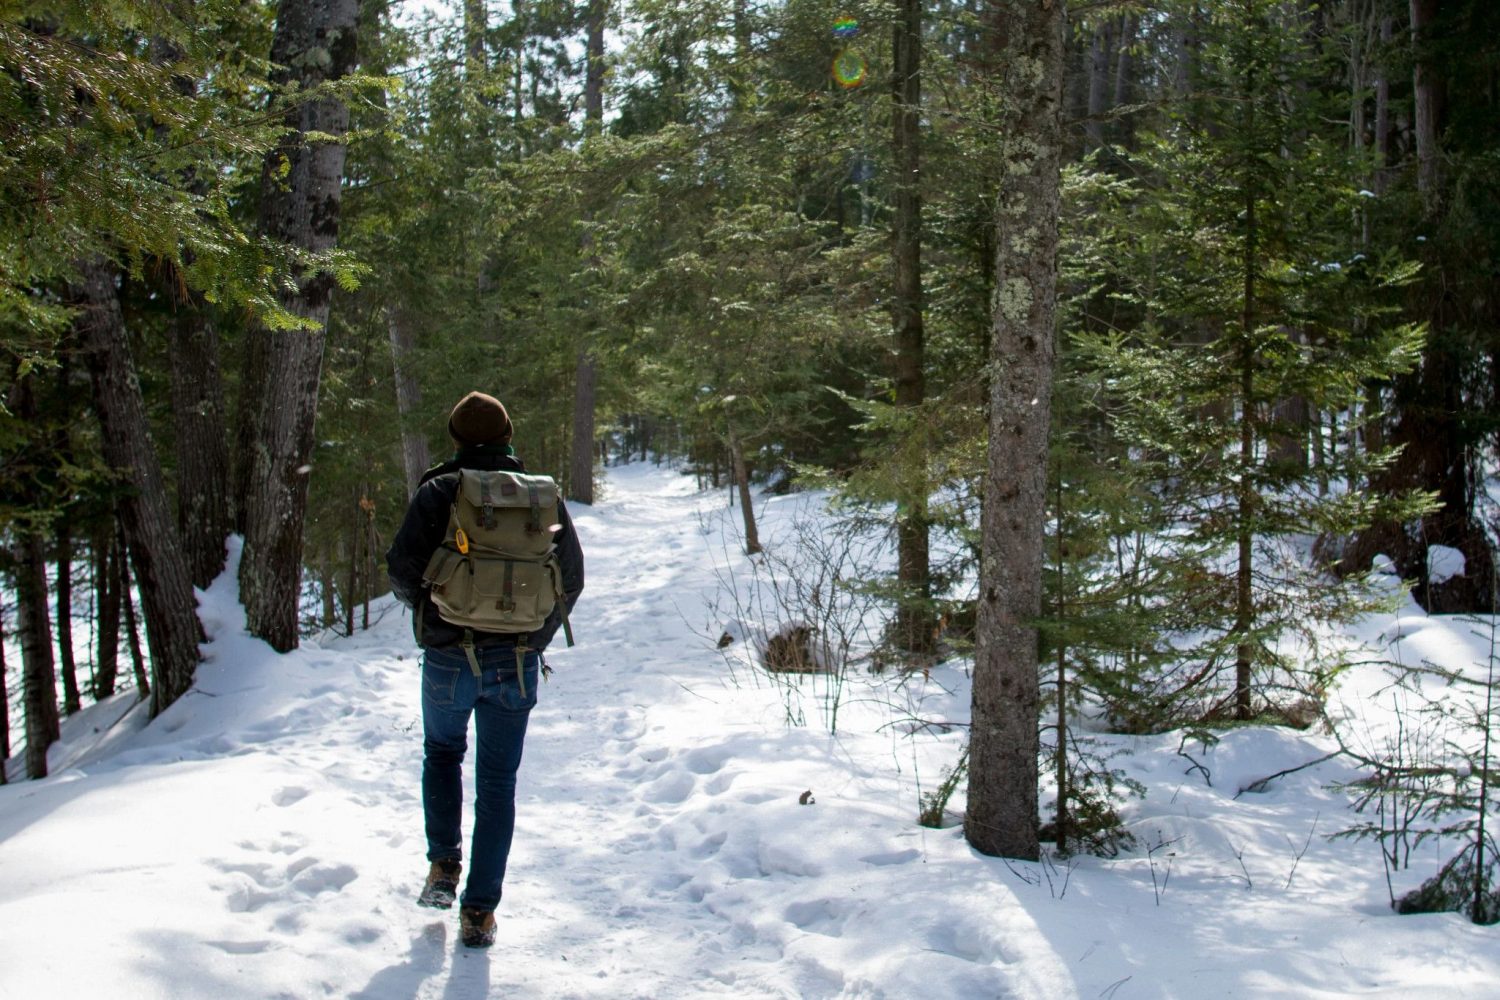 Latest Wisconsin Natural Resources Magazine spotlights seasonal State Park walks and outdoors for everyone